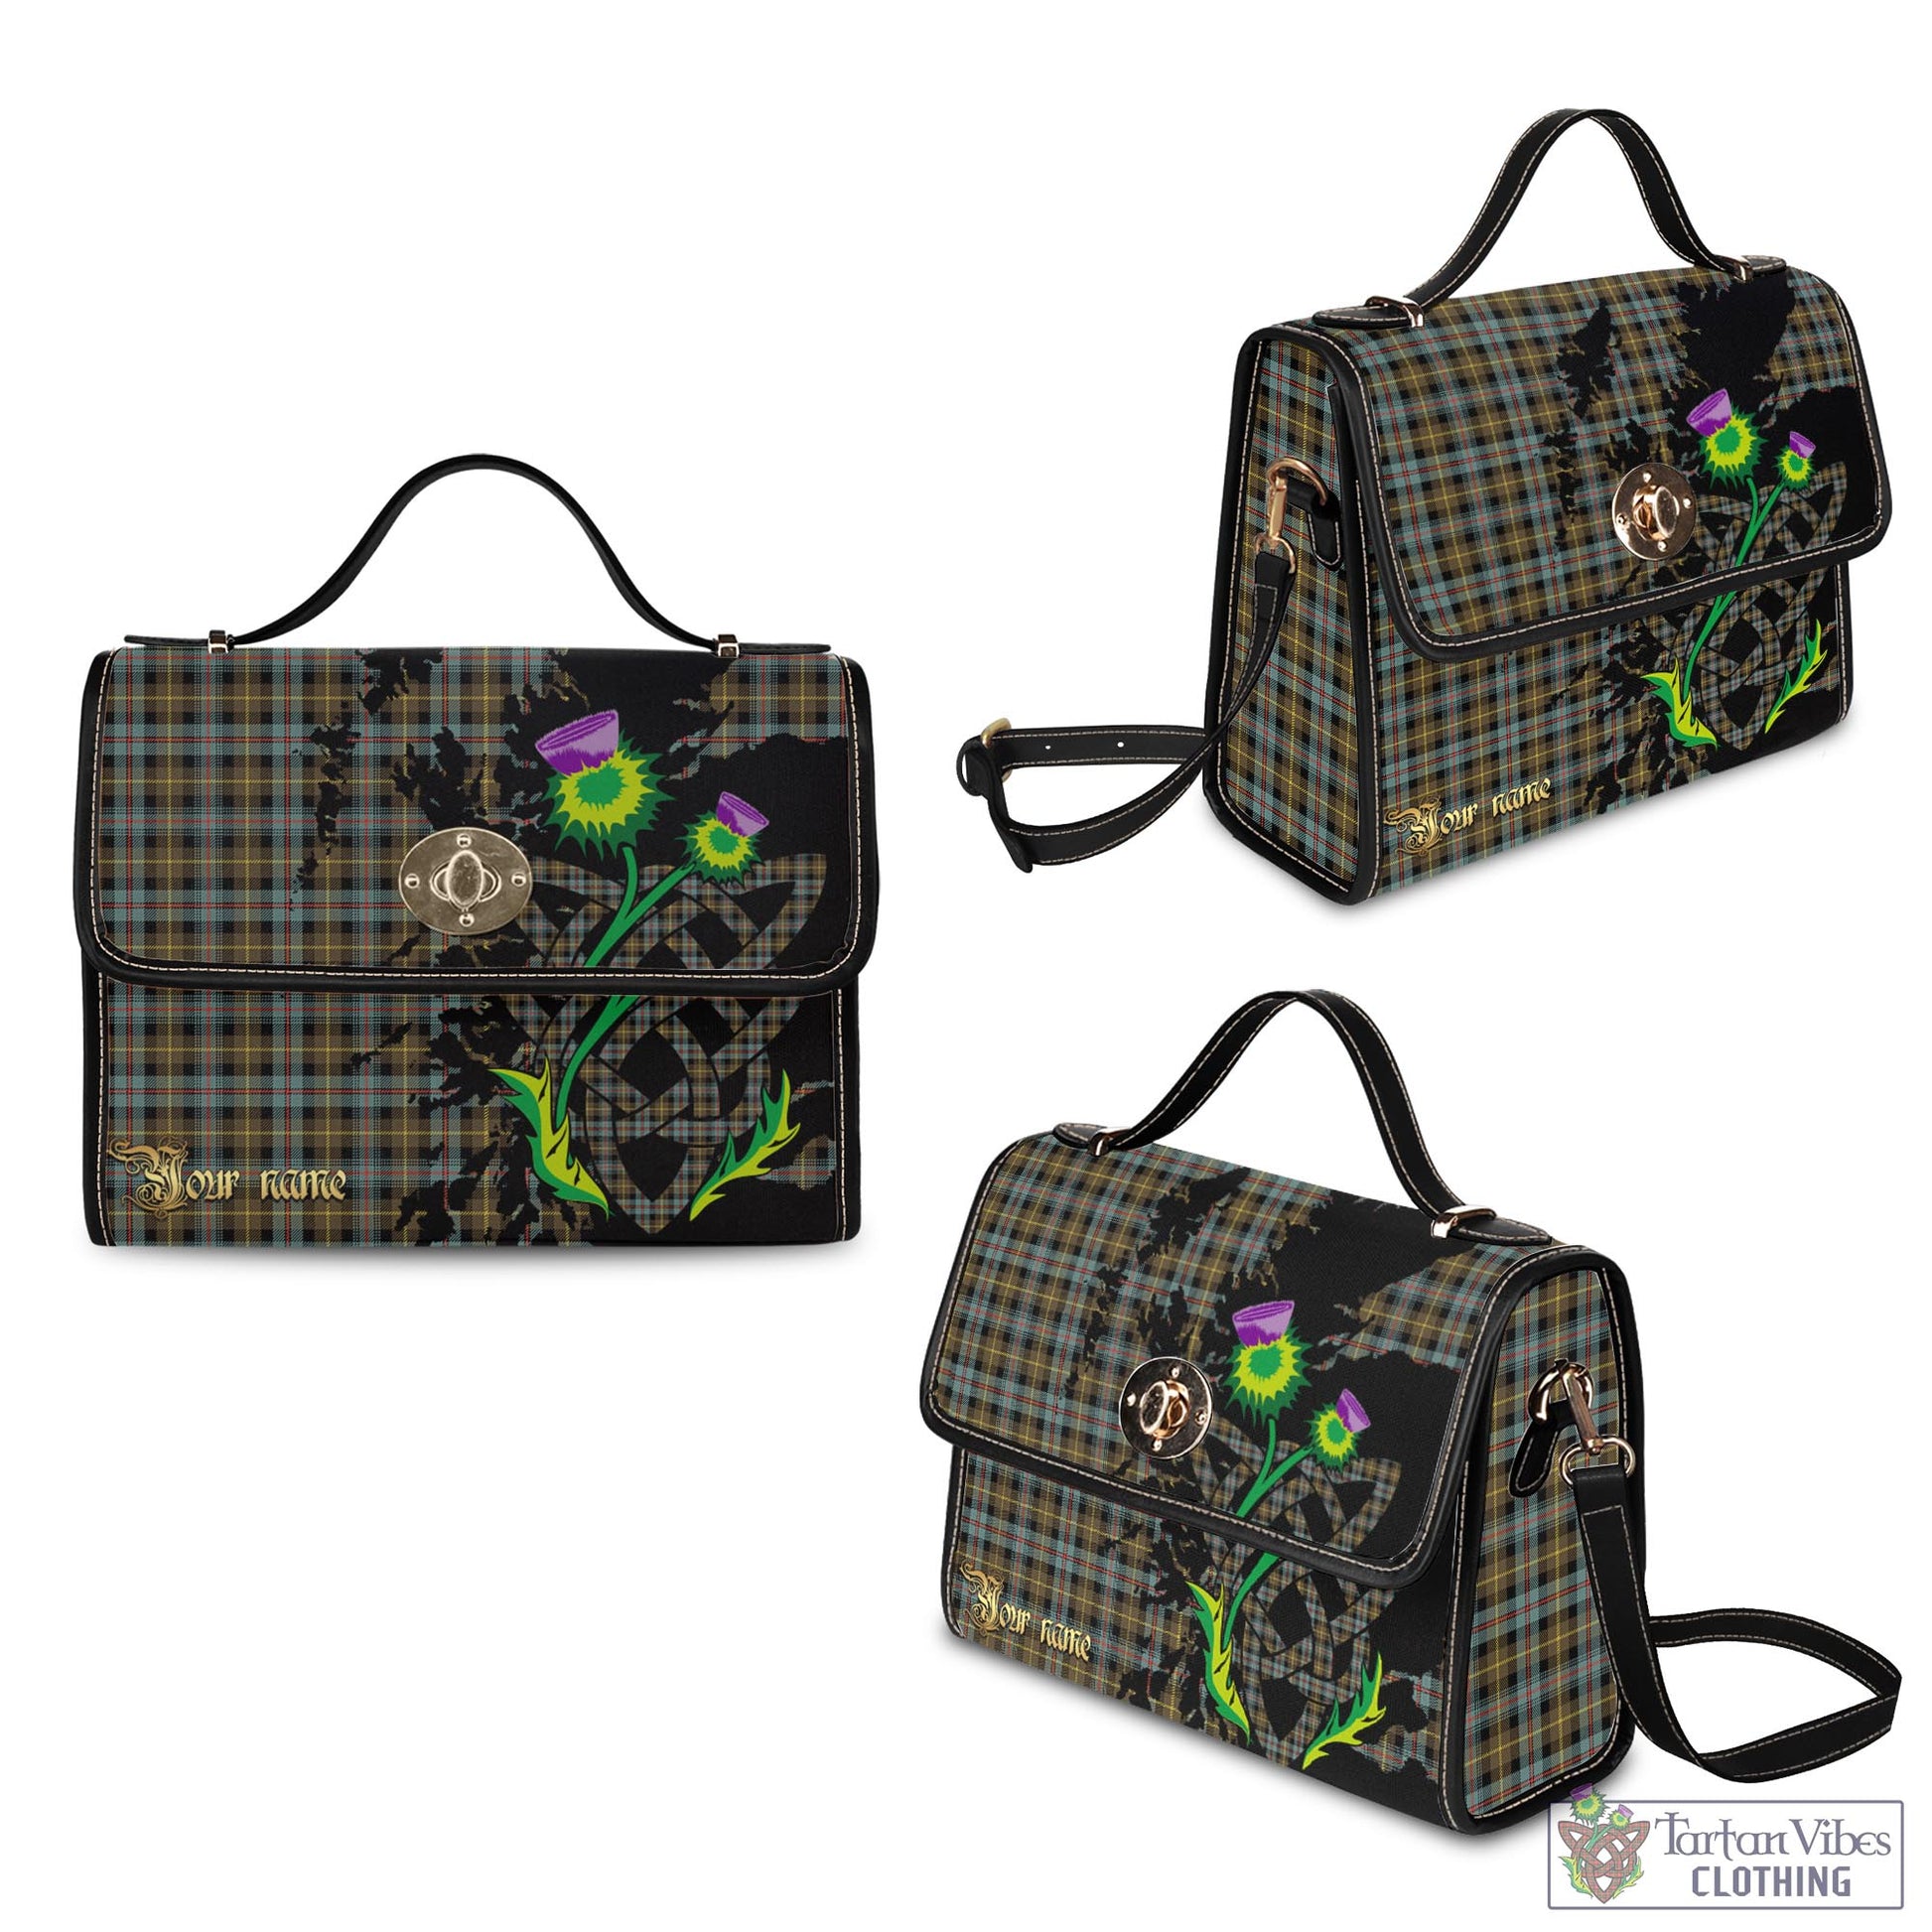 Tartan Vibes Clothing Farquharson Weathered Tartan Waterproof Canvas Bag with Scotland Map and Thistle Celtic Accents